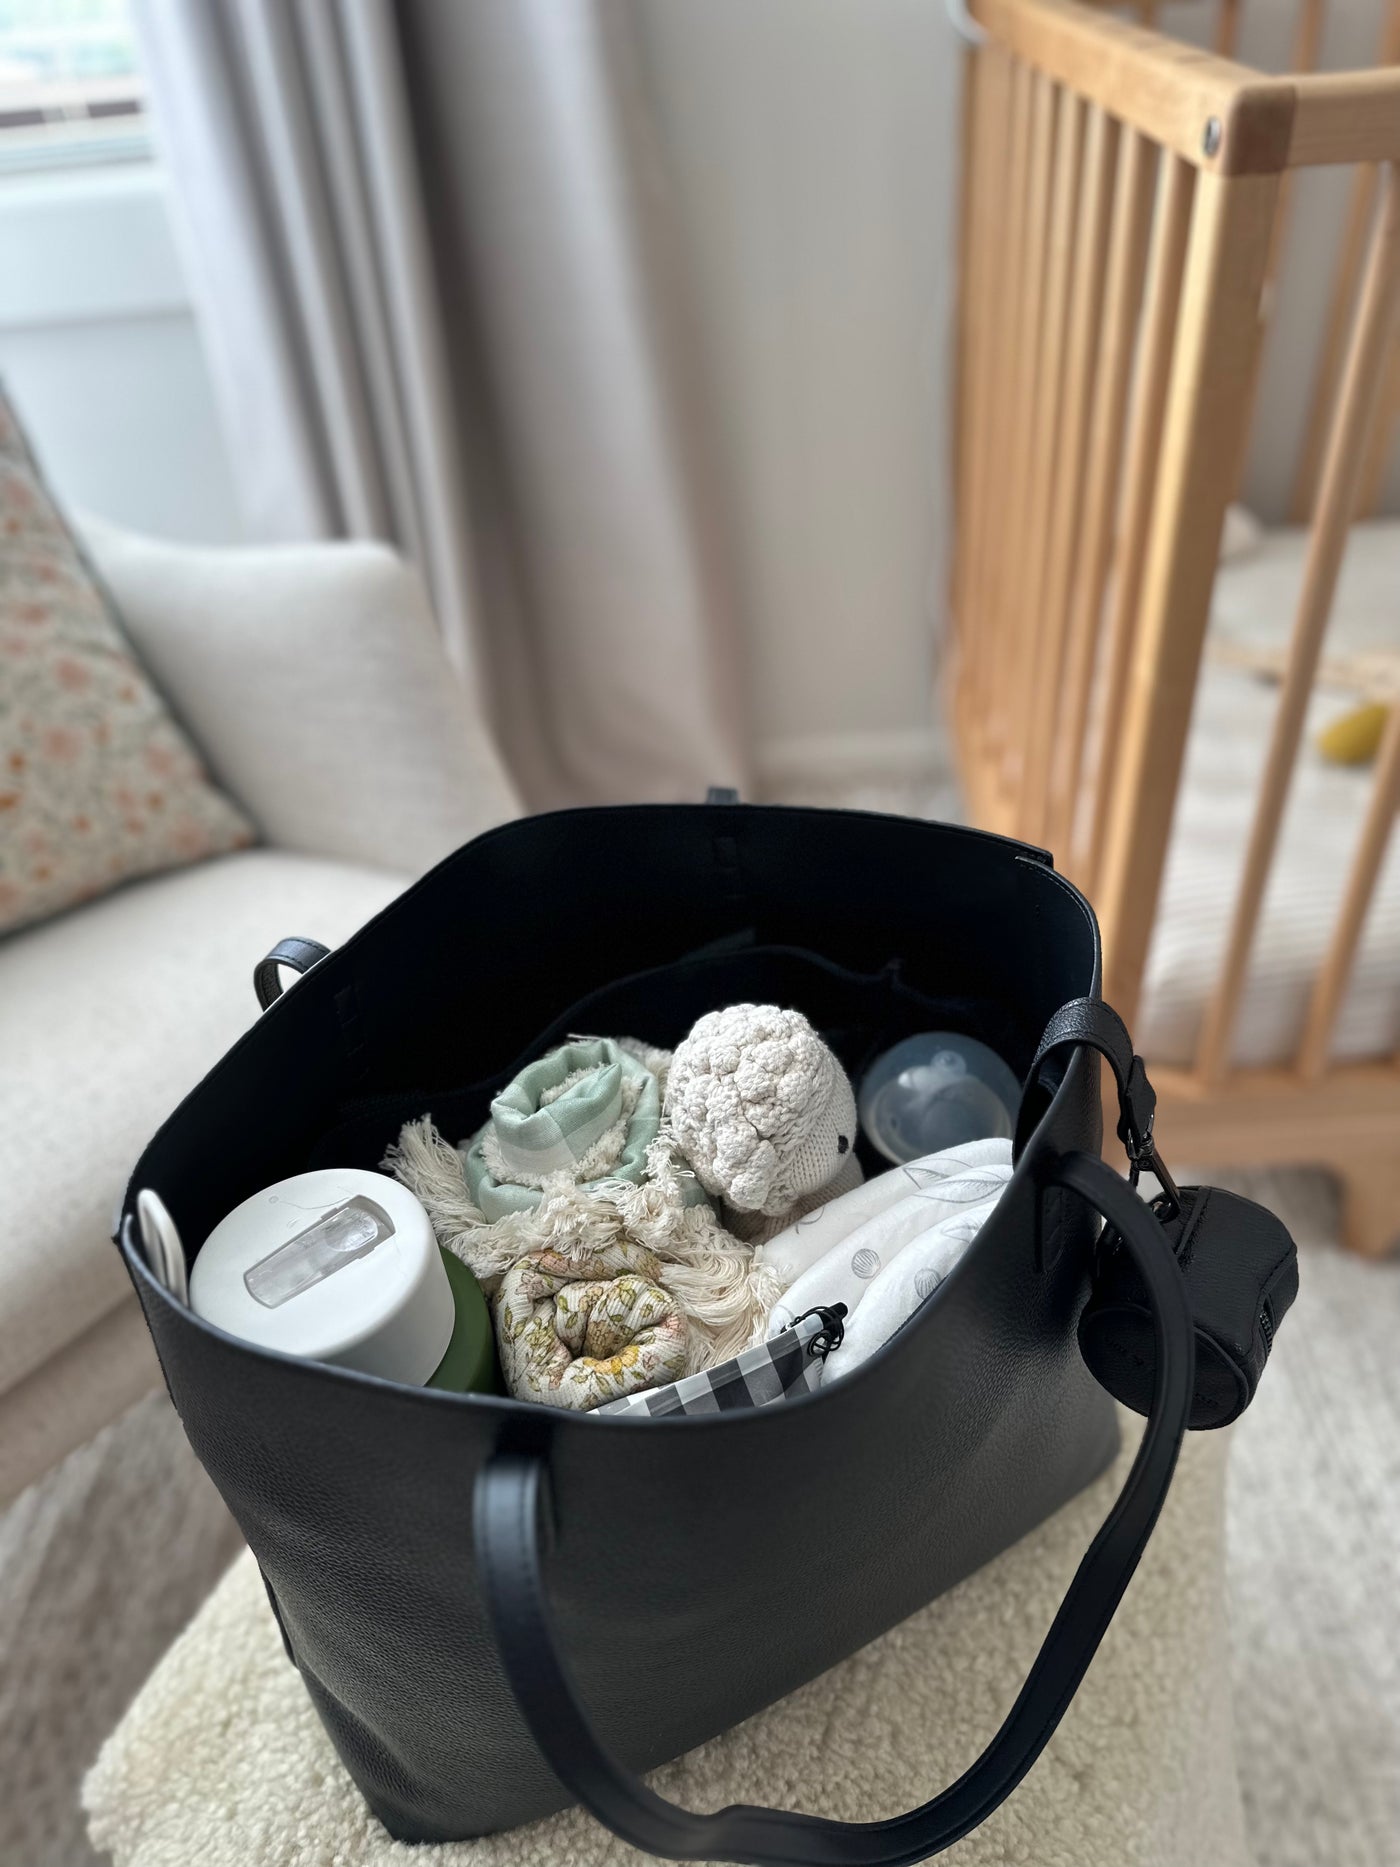 Baby Bag Inserts – Audrey & Me